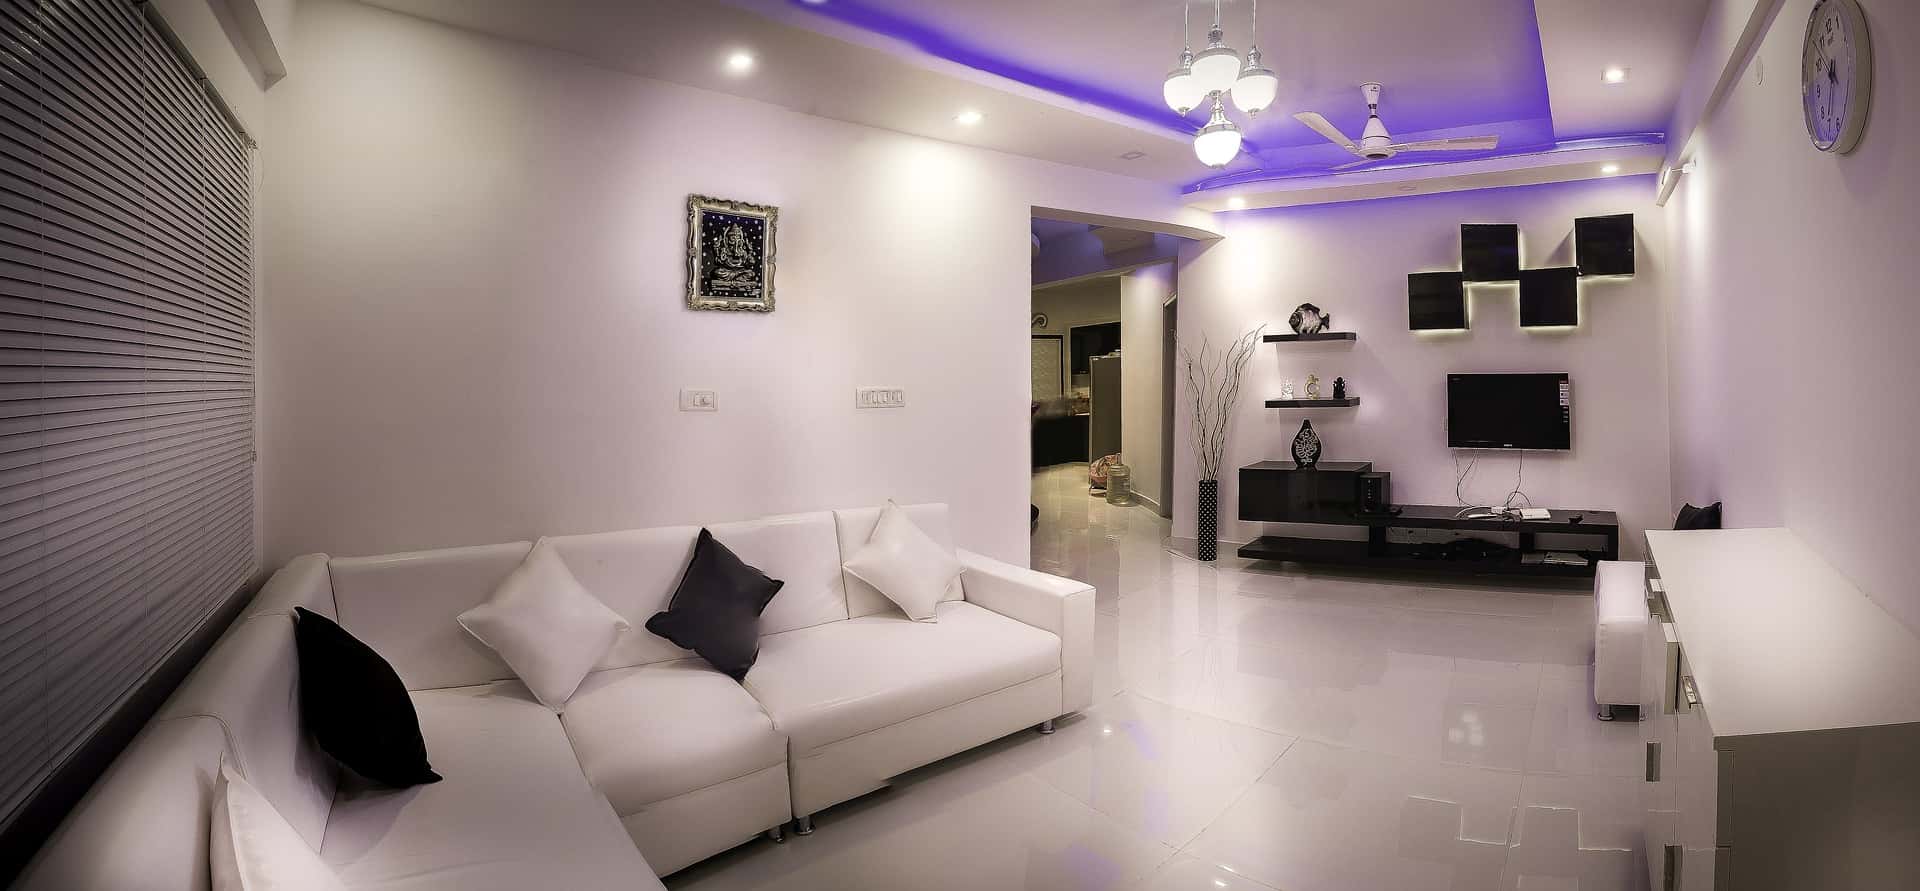 false ceilings with decorative lighting